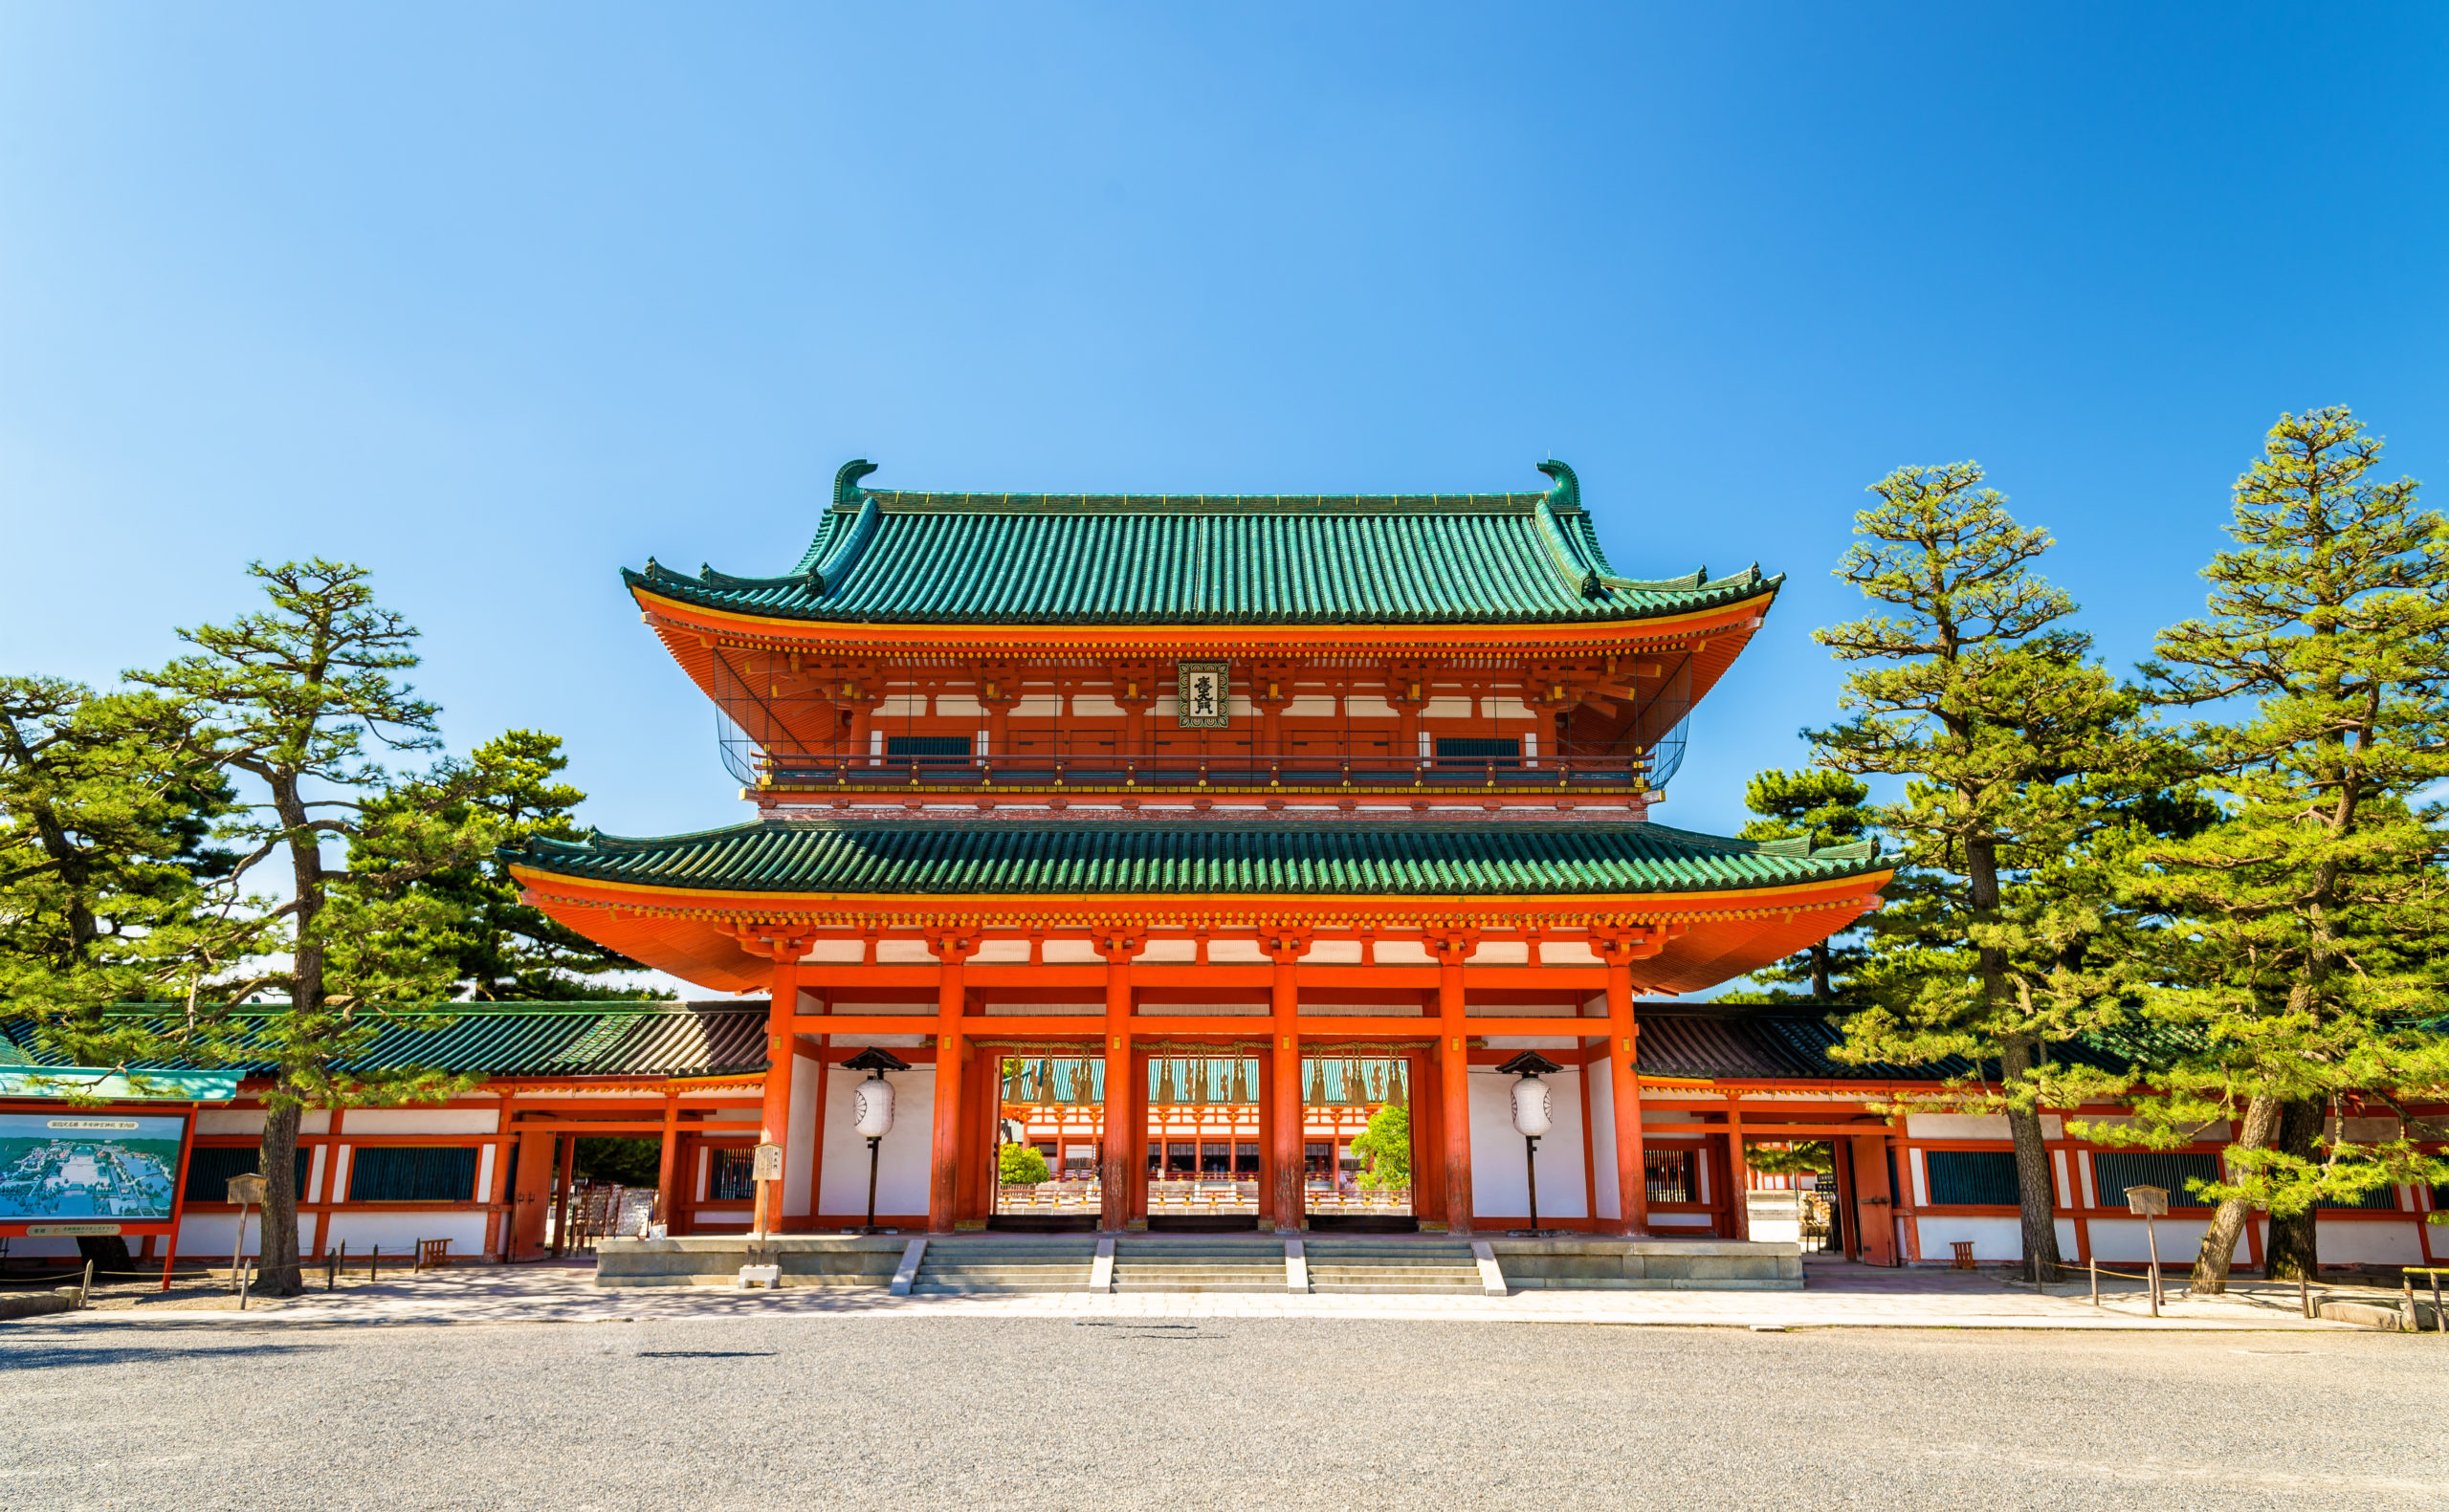 A Guide to Heian Shrine in Kyoto, Japan